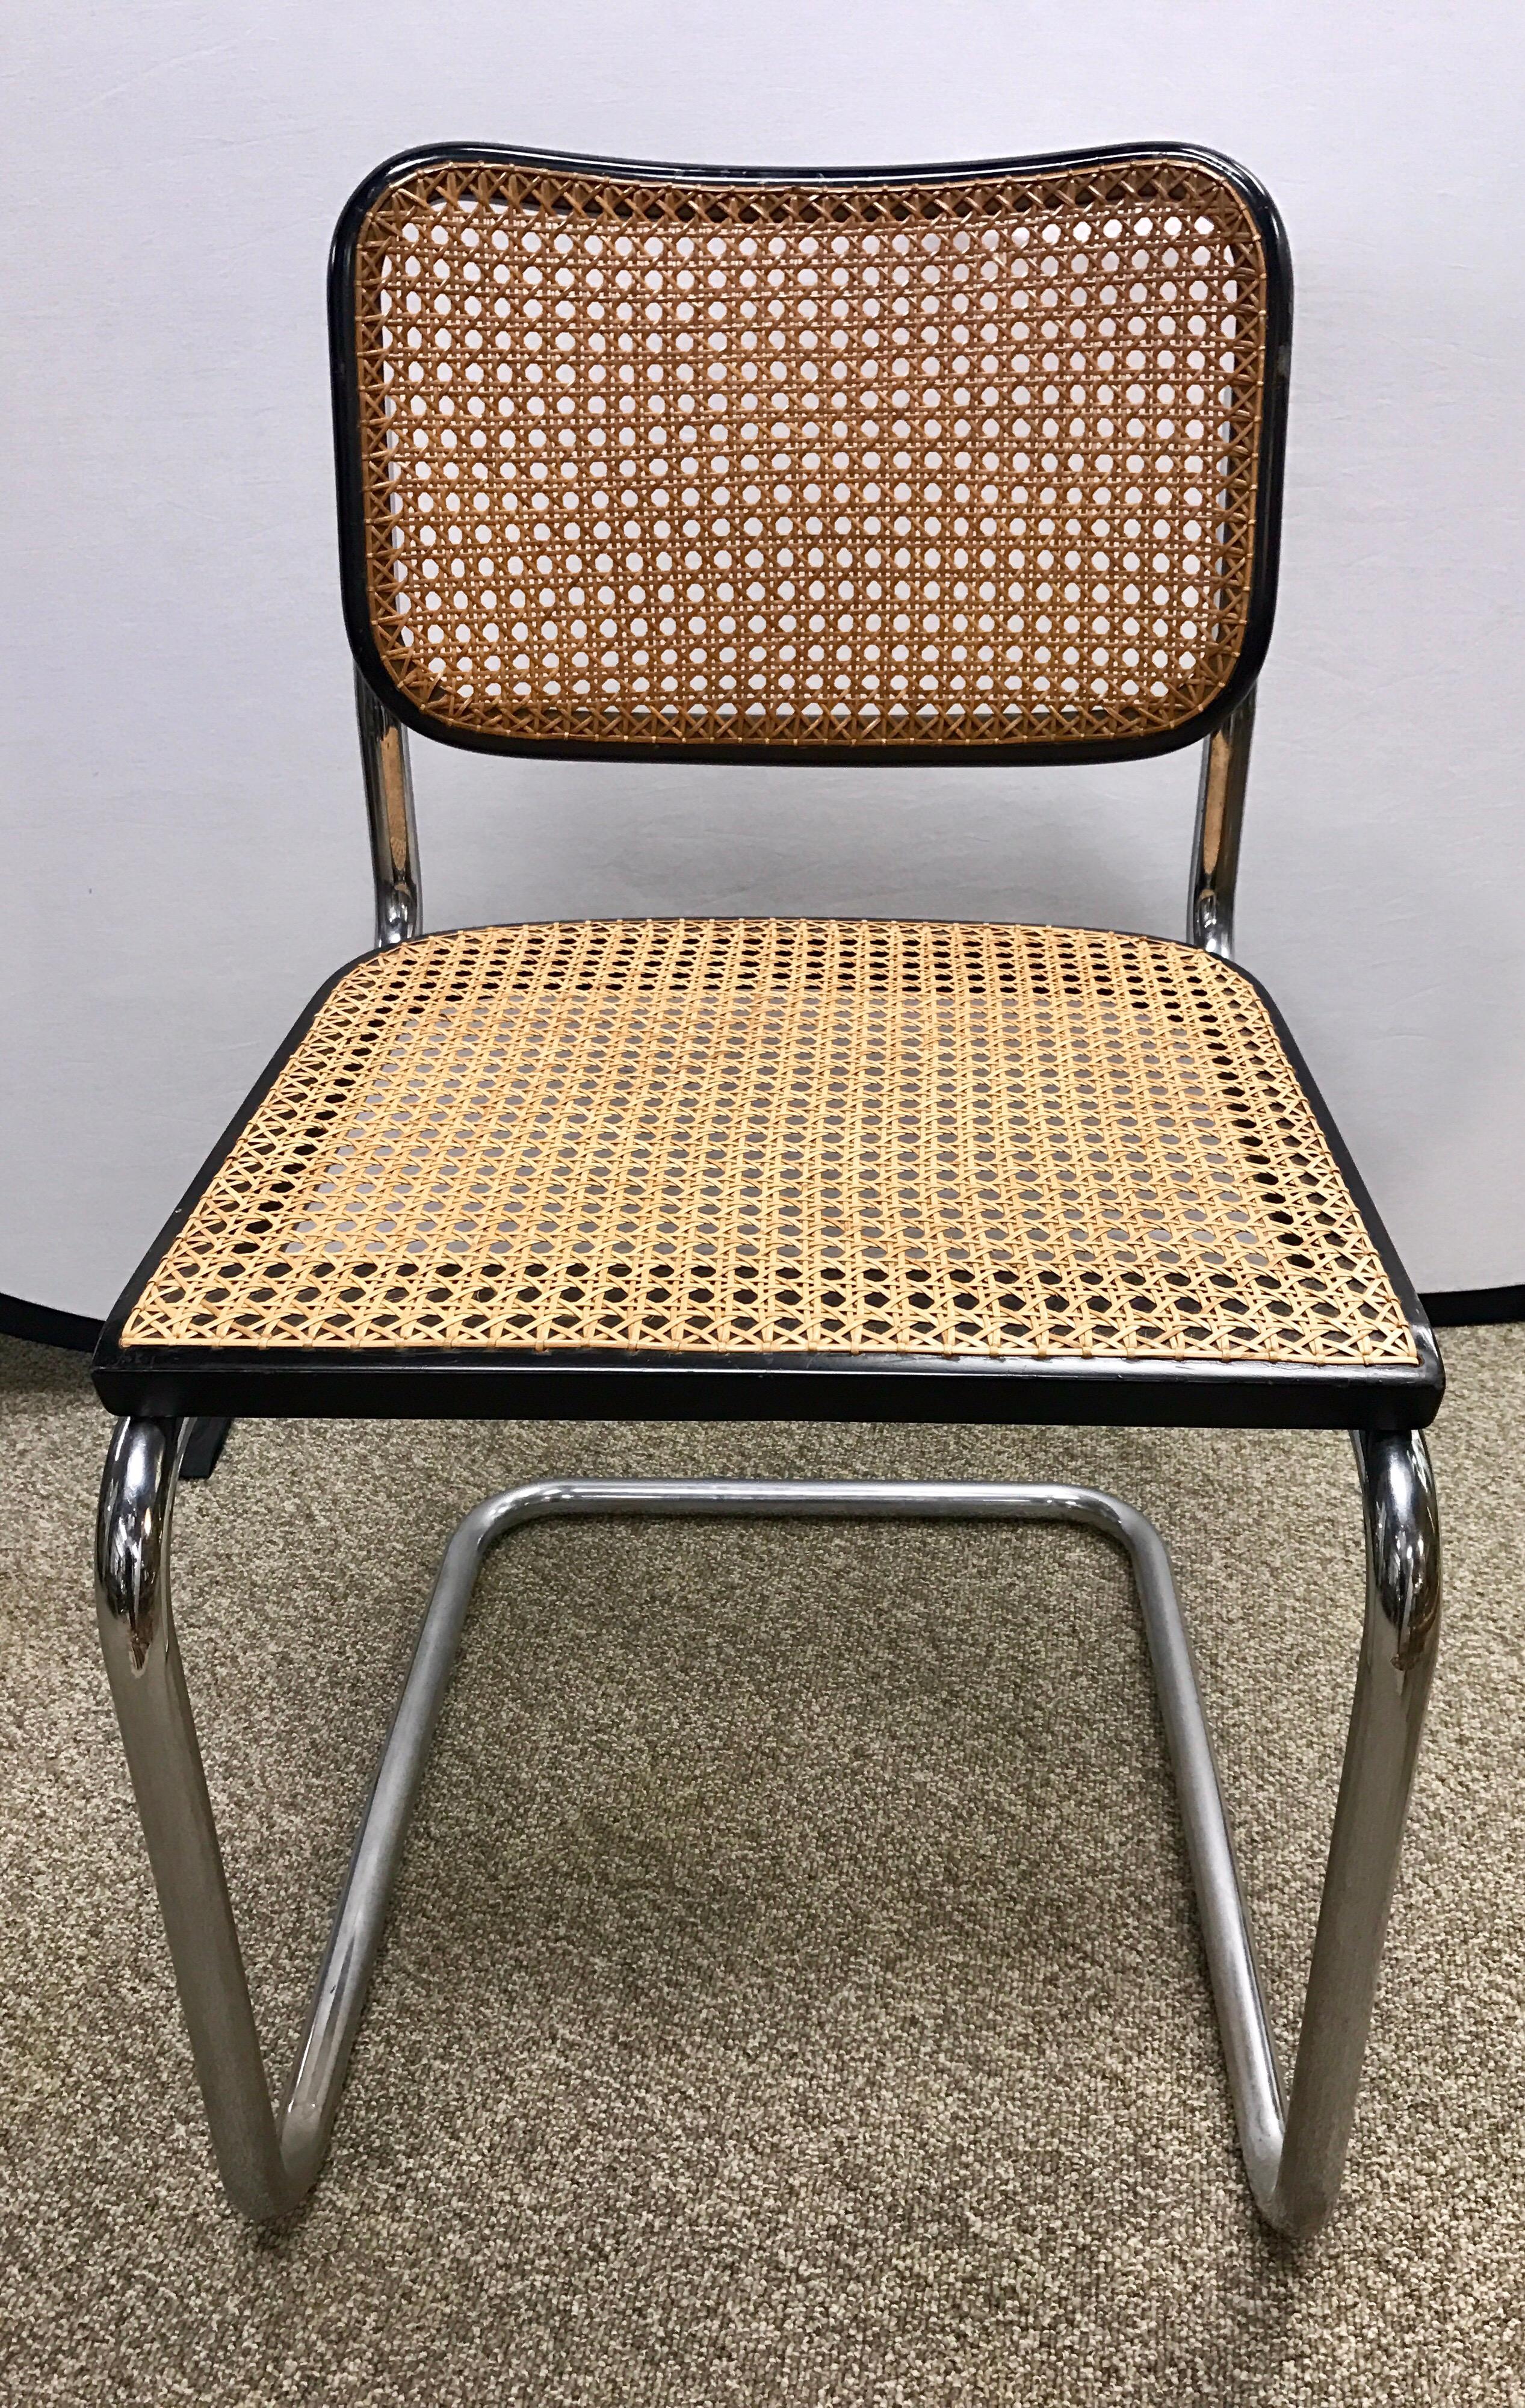 Gorgeous individual signed Knoll dining chair. Chair is hallmarked at bottom.